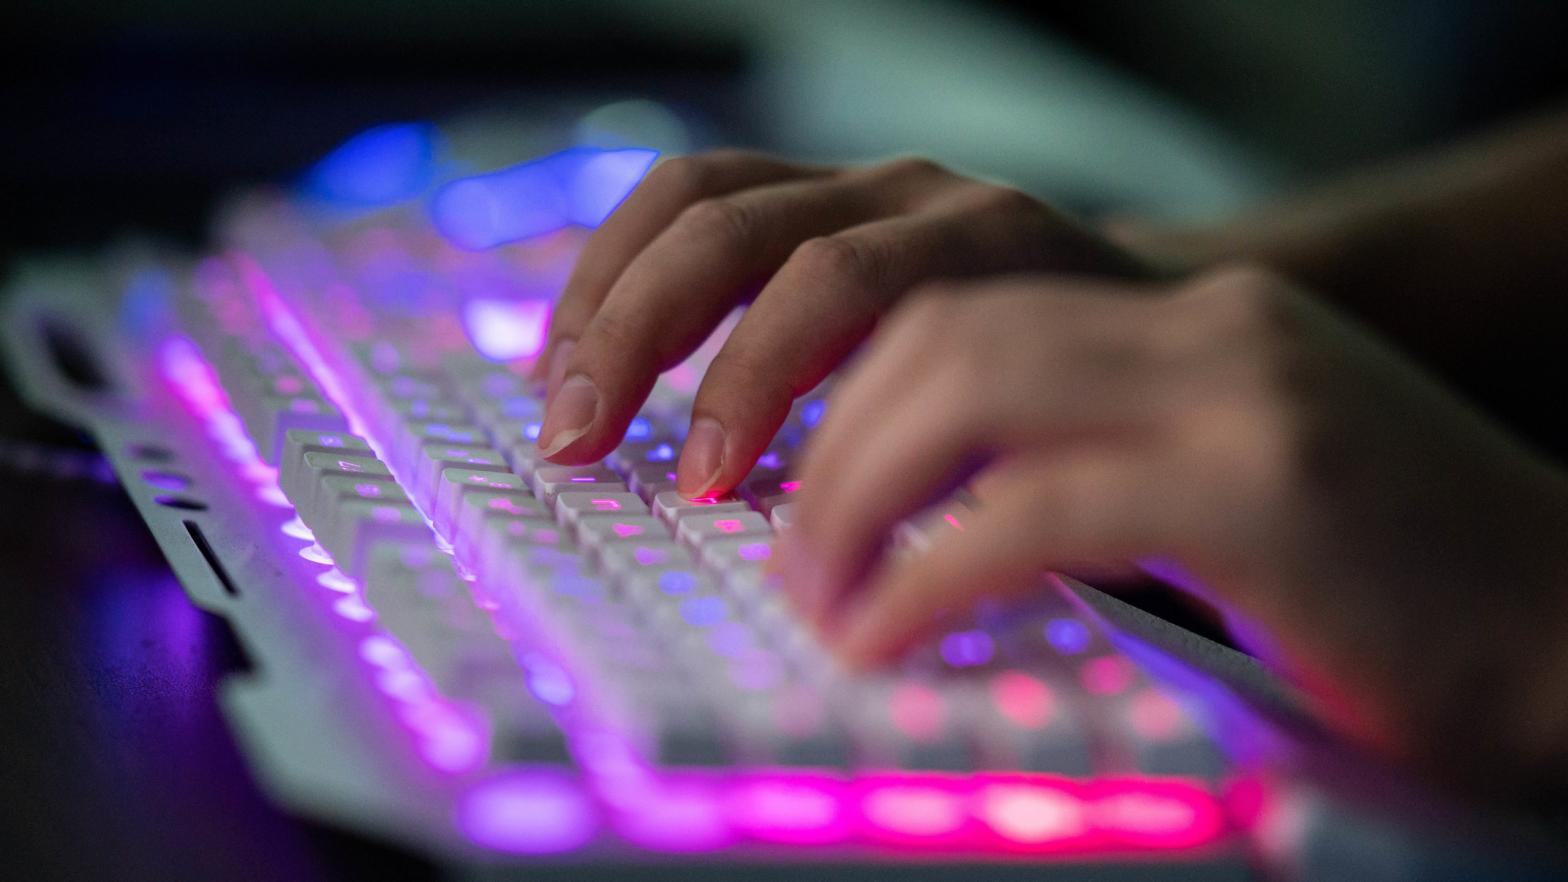 In this file photo taken on August 04, 2020, Prince, a member of the hacking group Red Hacker Alliance who refused to give his real name, uses his computer at their office in Dongguan, China's southern Guangdong province. (Photo: Photo by NICOLAS ASFOURI / AFP) (Photo by NICOLAS ASFOURI/AFP via Getty Images, Getty Images)